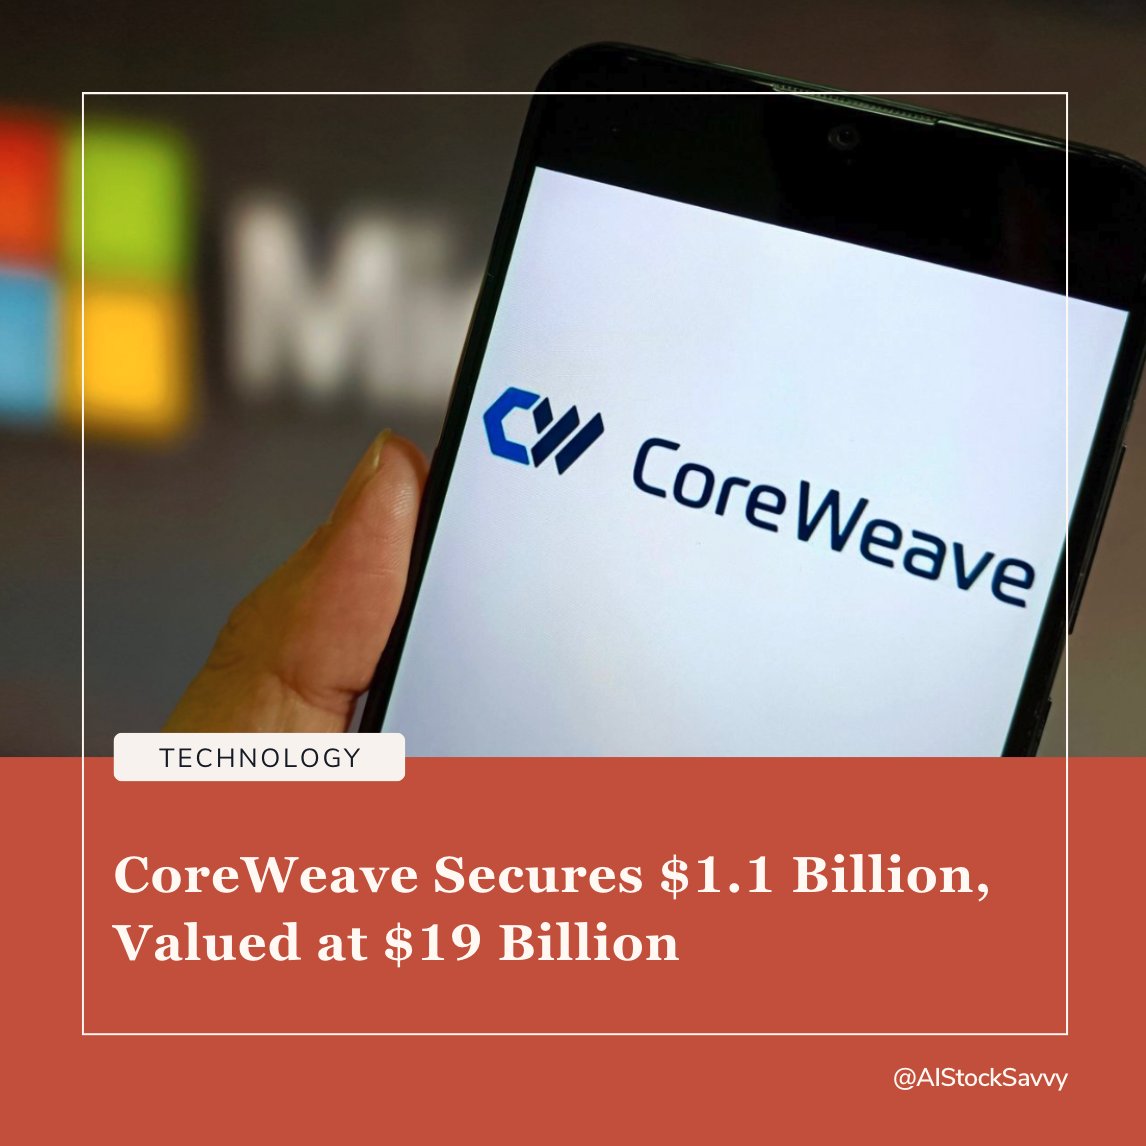 📣 JUST IN: AI Cloud Computing Startup CoreWeave Valued at $19 Billion in New Funding Round - WSJ

$NVDA $AMZN $GOOGL $META 

👉 Key Highlights:

📍 CoreWeave backed by Nvidia, secured $1.1 billion from investors, raising its valuation to $19 billion.

📍 The funding round was